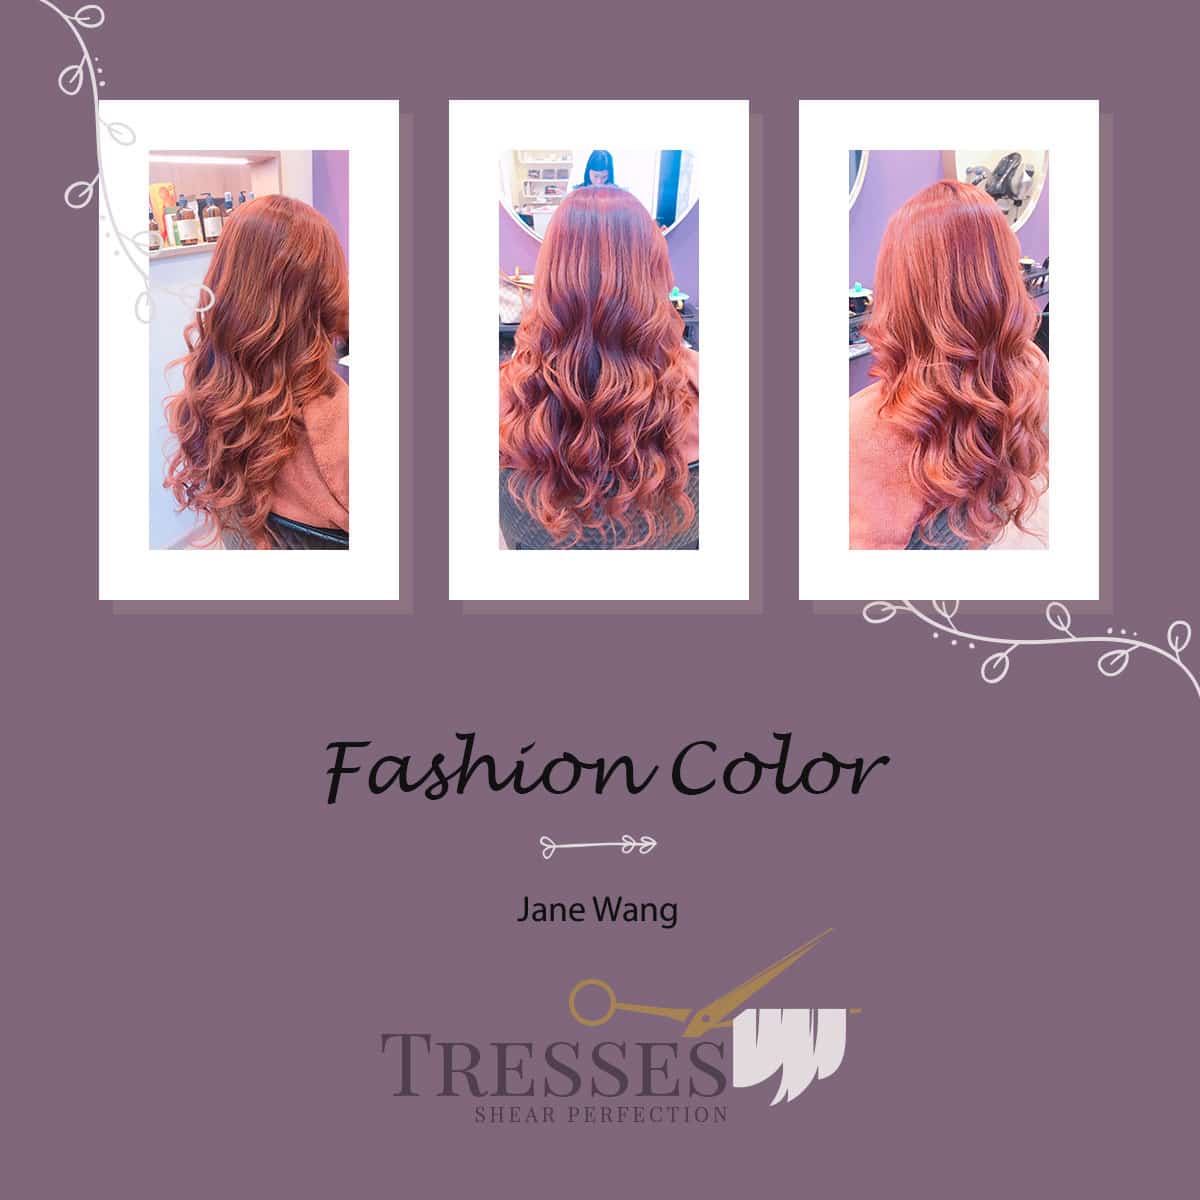 Fashion Color by Jane Wang